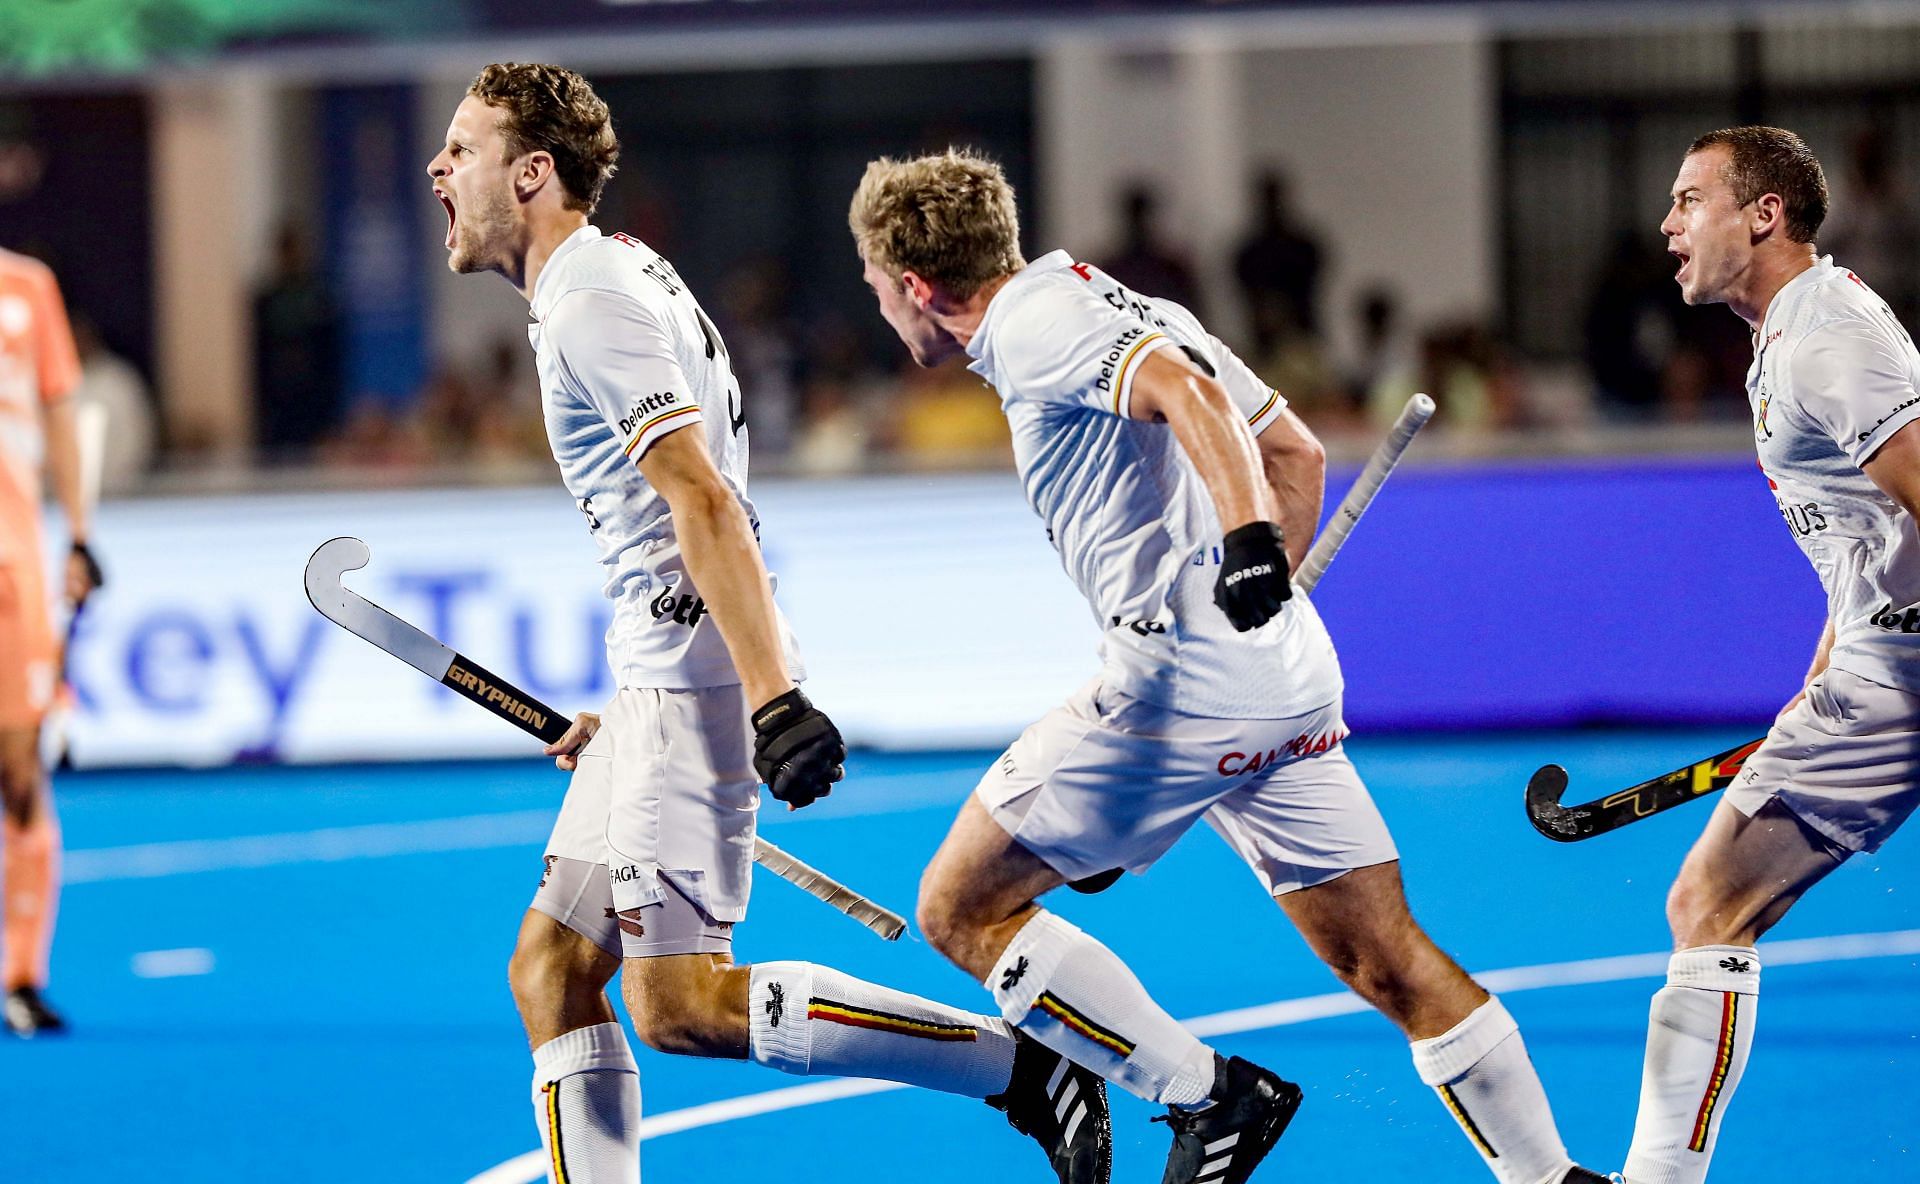 Belgium won the Hockey World Cup semifinal against the Netherlands